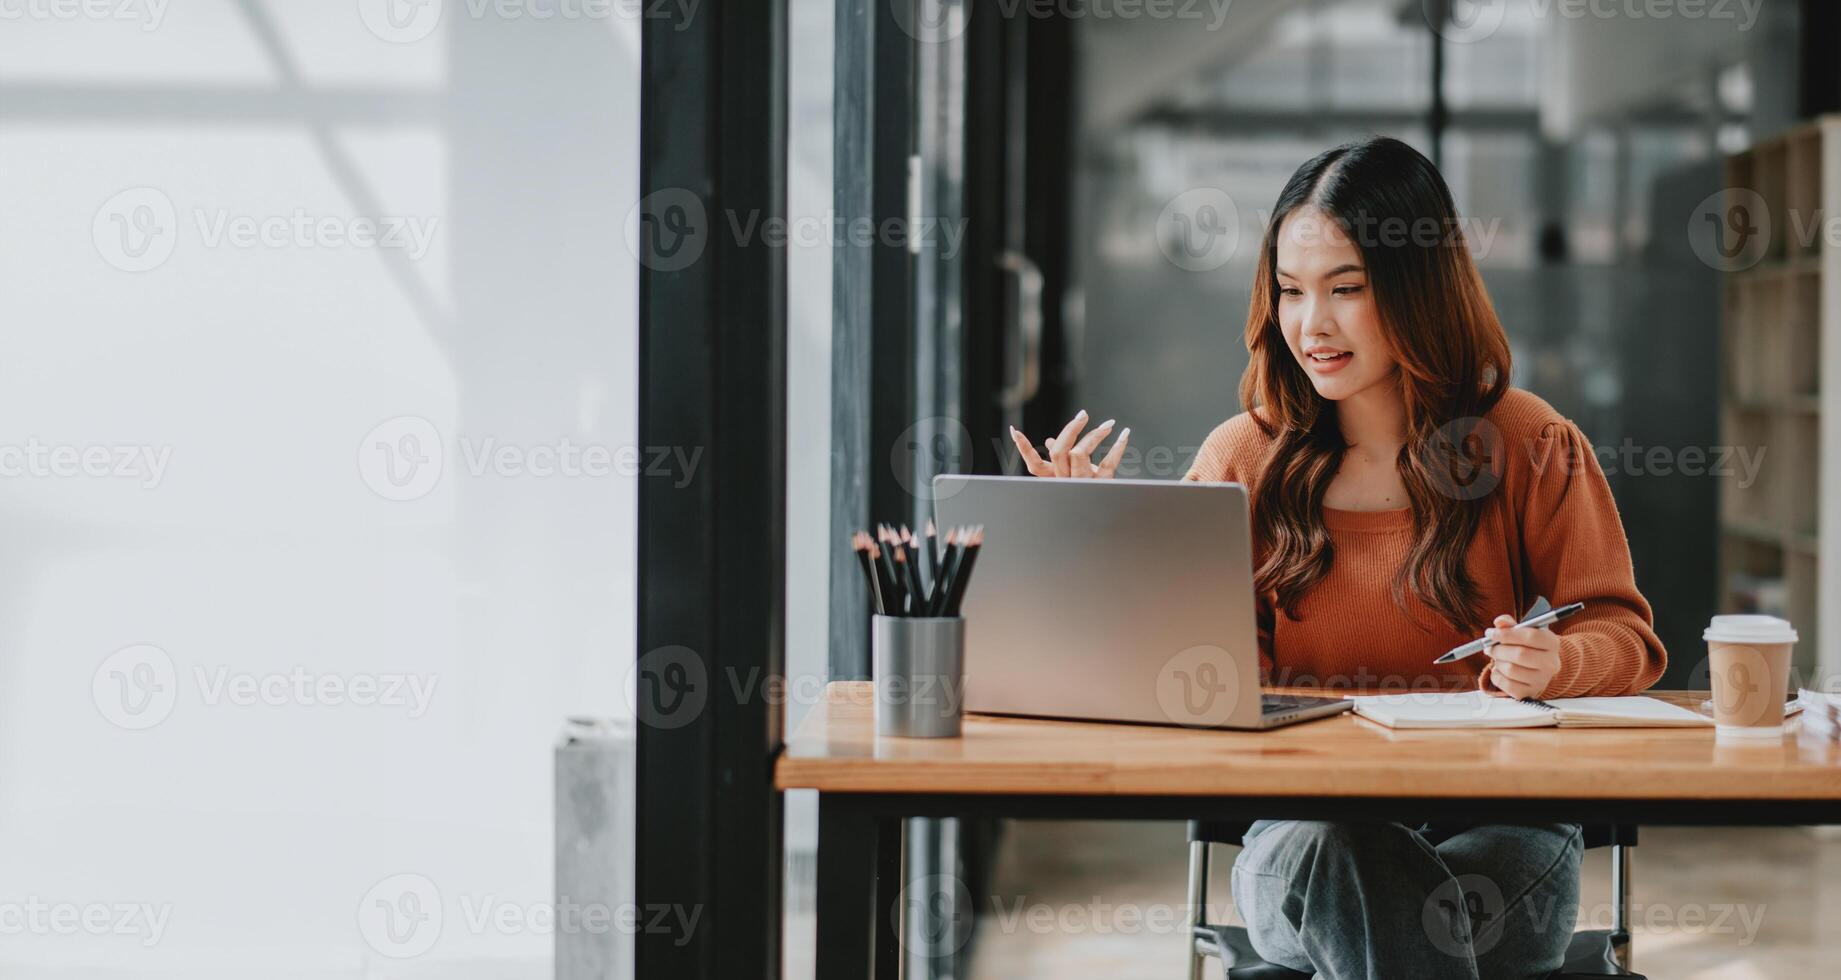 Young businesswoman looks animated and engaged while speaking during a conference call on her laptop in a stylish workspace. photo